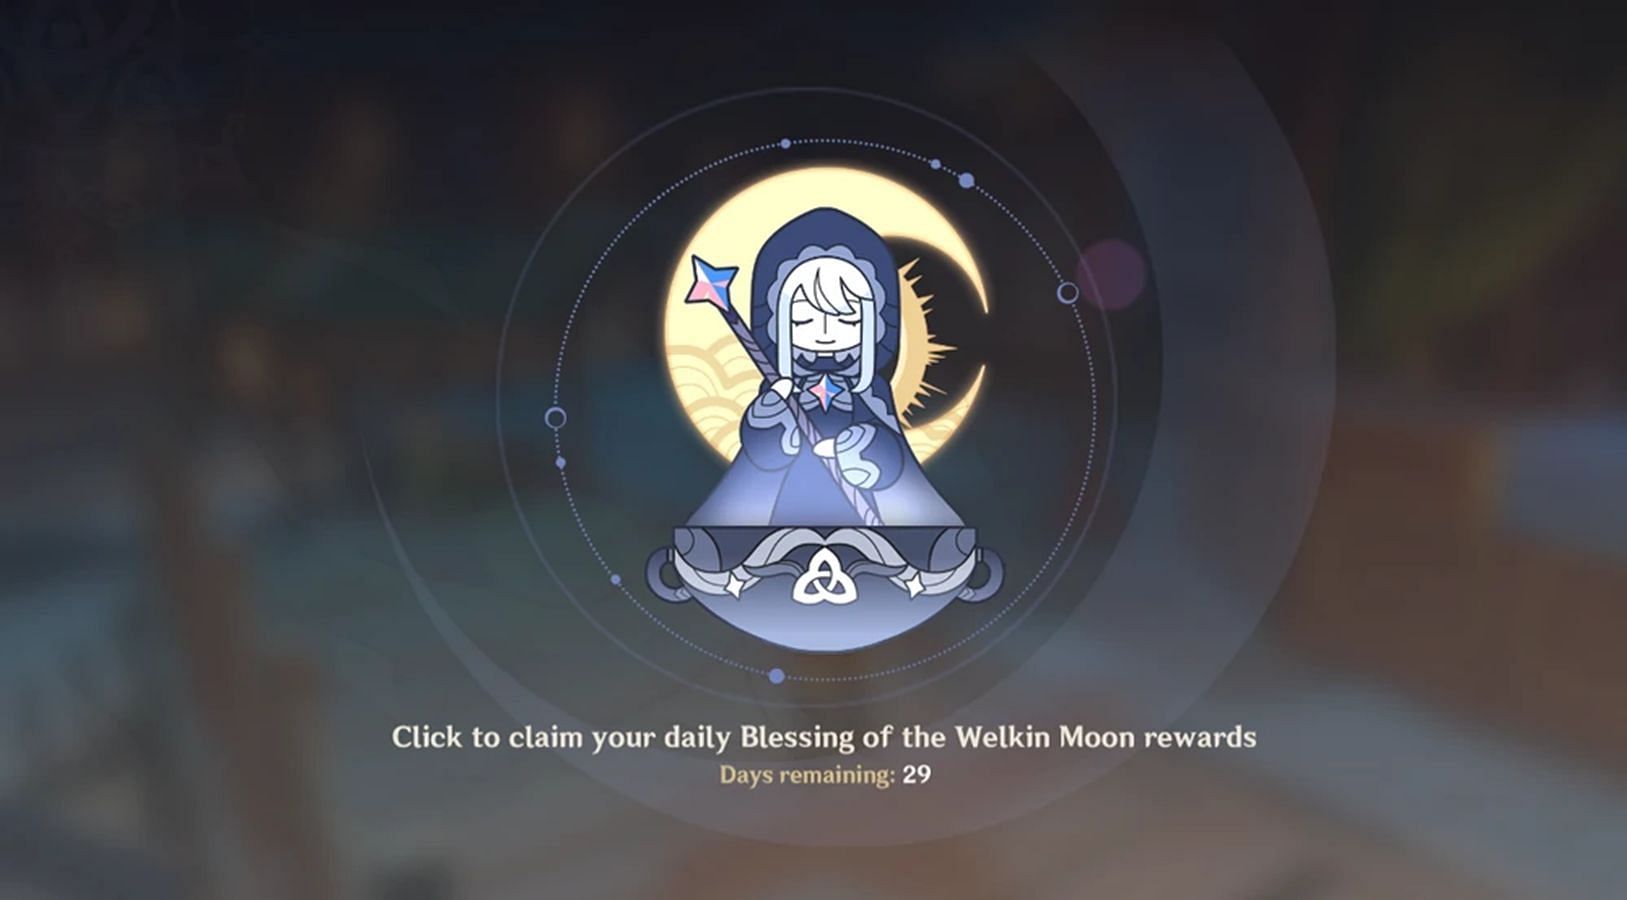 Blessing of the Welkin Moon (Image via HoYoverse)